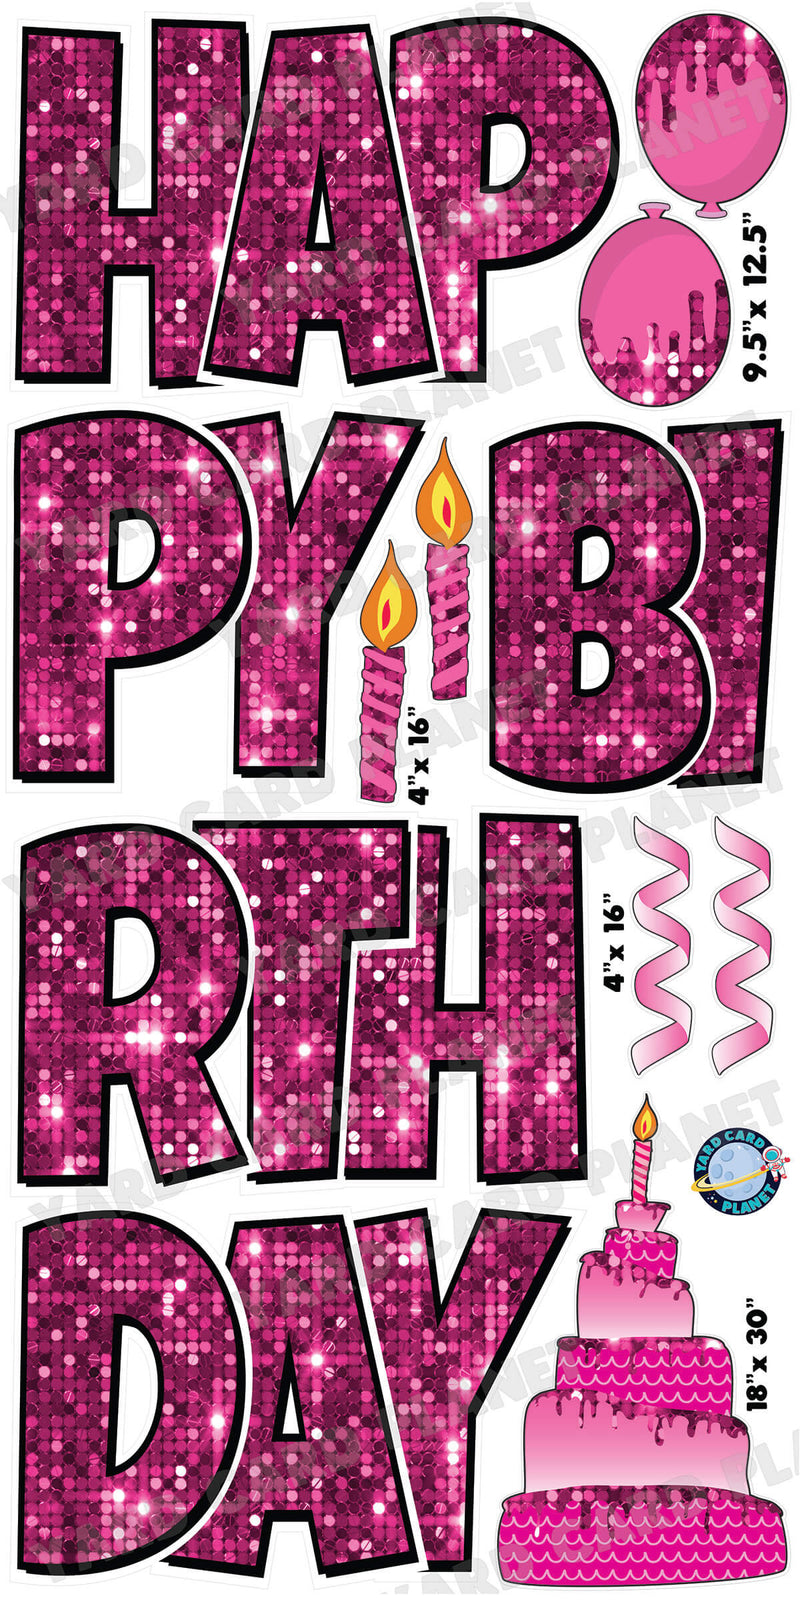 Large 23.5" Happy Birthday Yard Card EZ Quick Sets in Luckiest Guy Font and Birthday Flair in Hot Pink Sequin Pattern